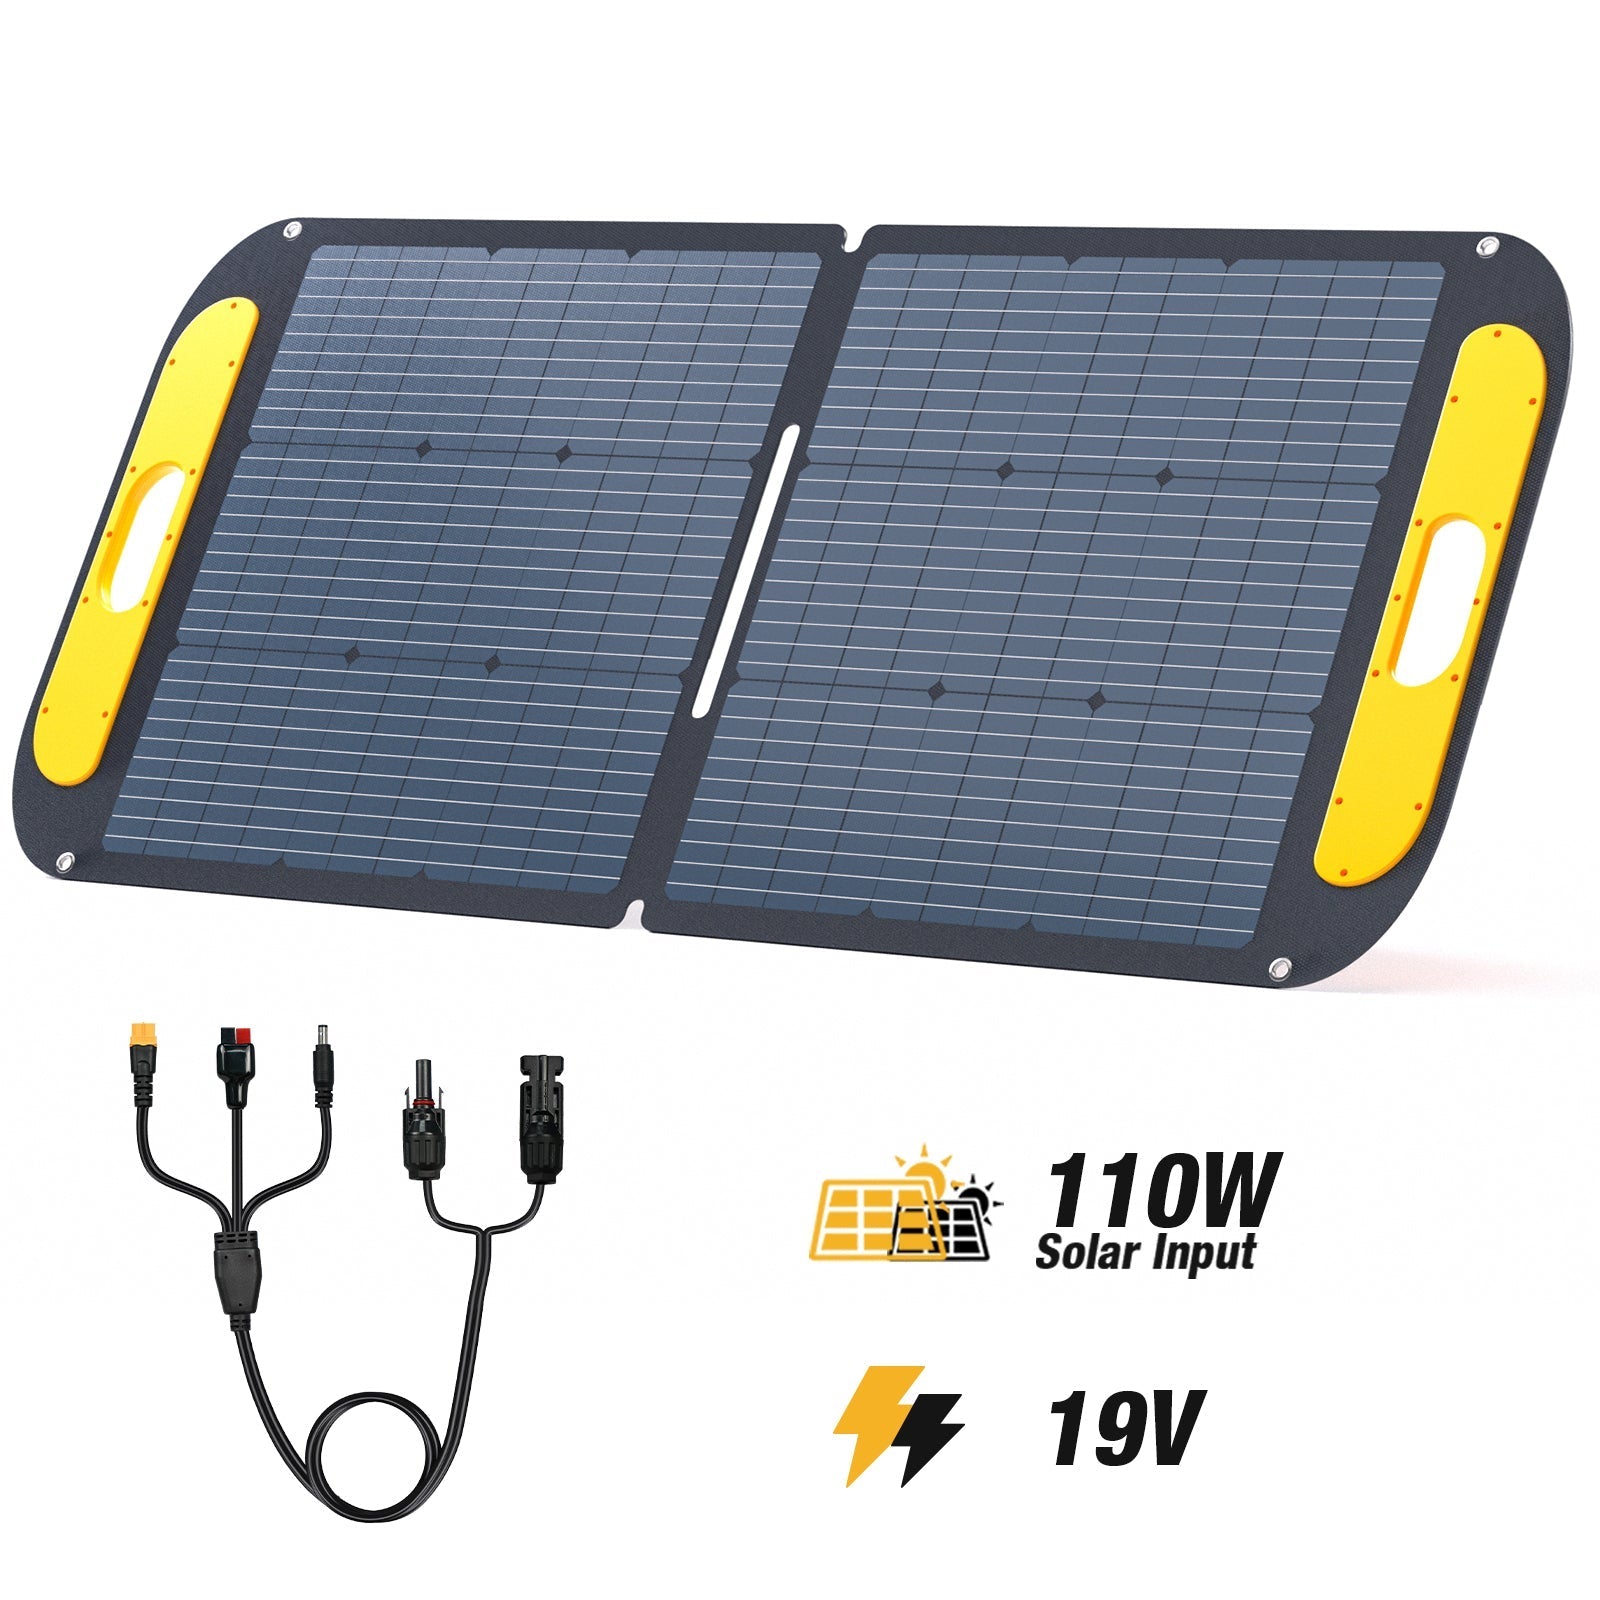 Jump 600W/640Wh 110W Solargenerator